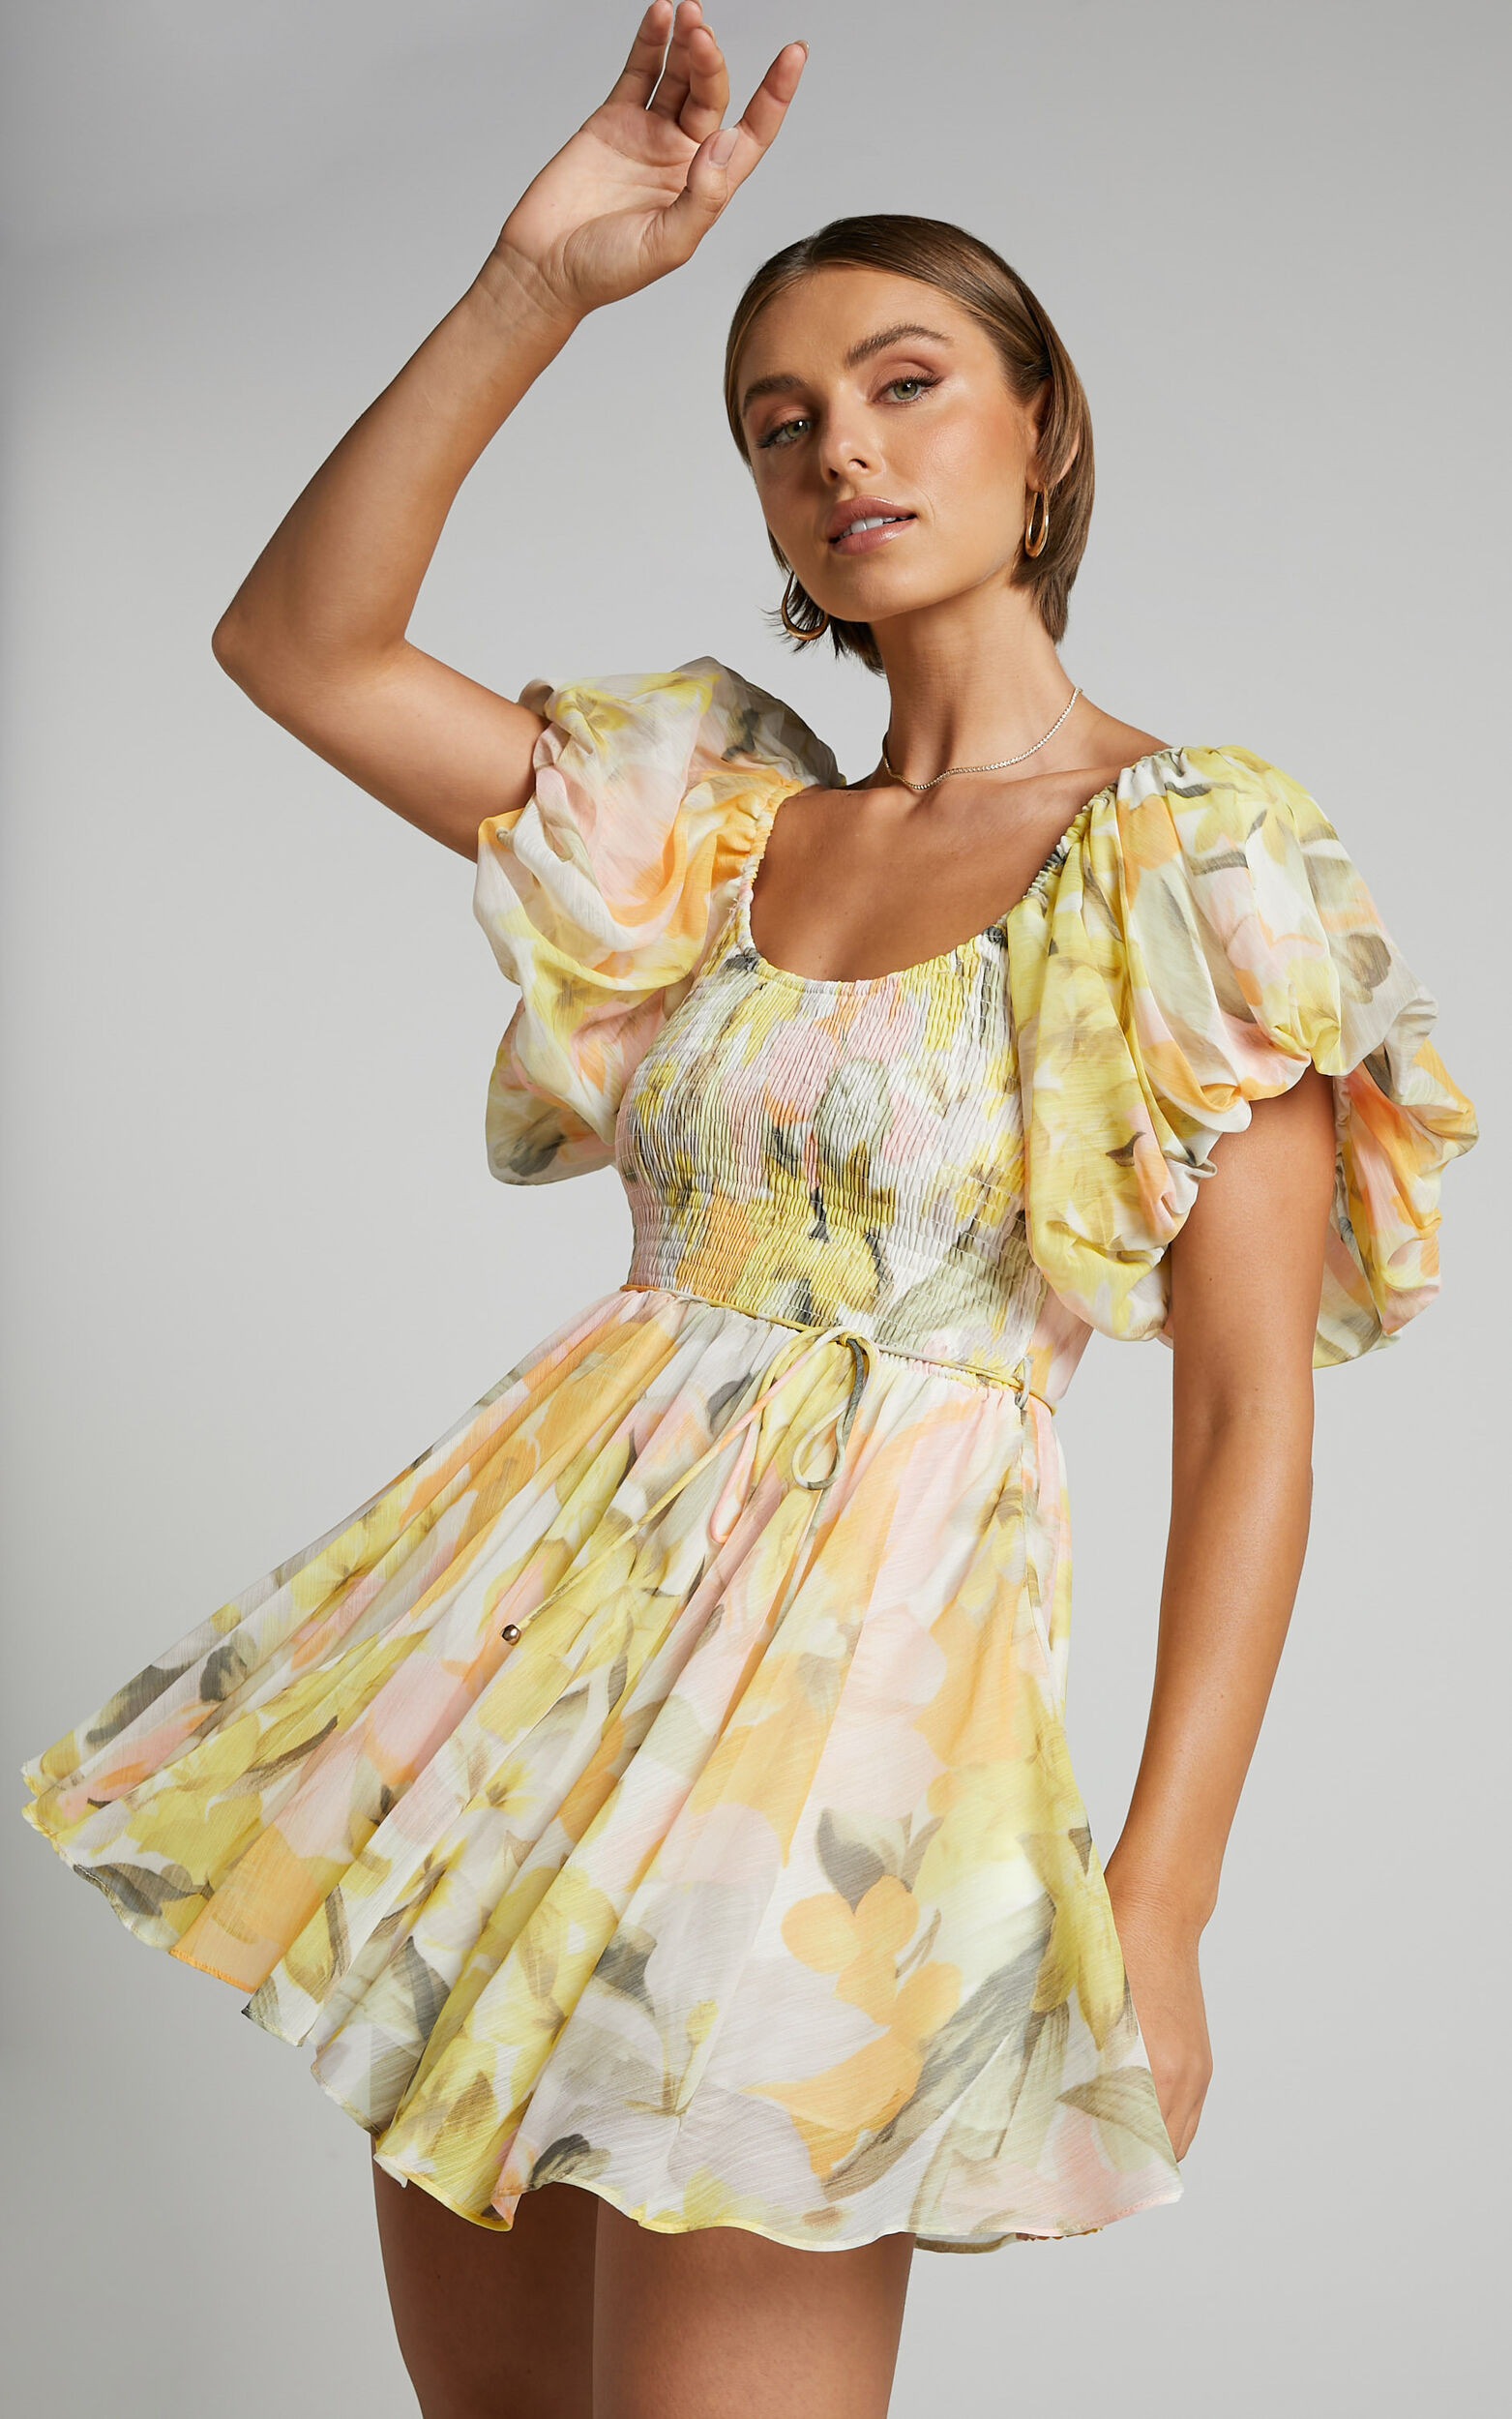 Soraia Mini Dress - Scoop Neck Puff Sleeve Gathered Dress in Yellow Floral - 06, YEL1